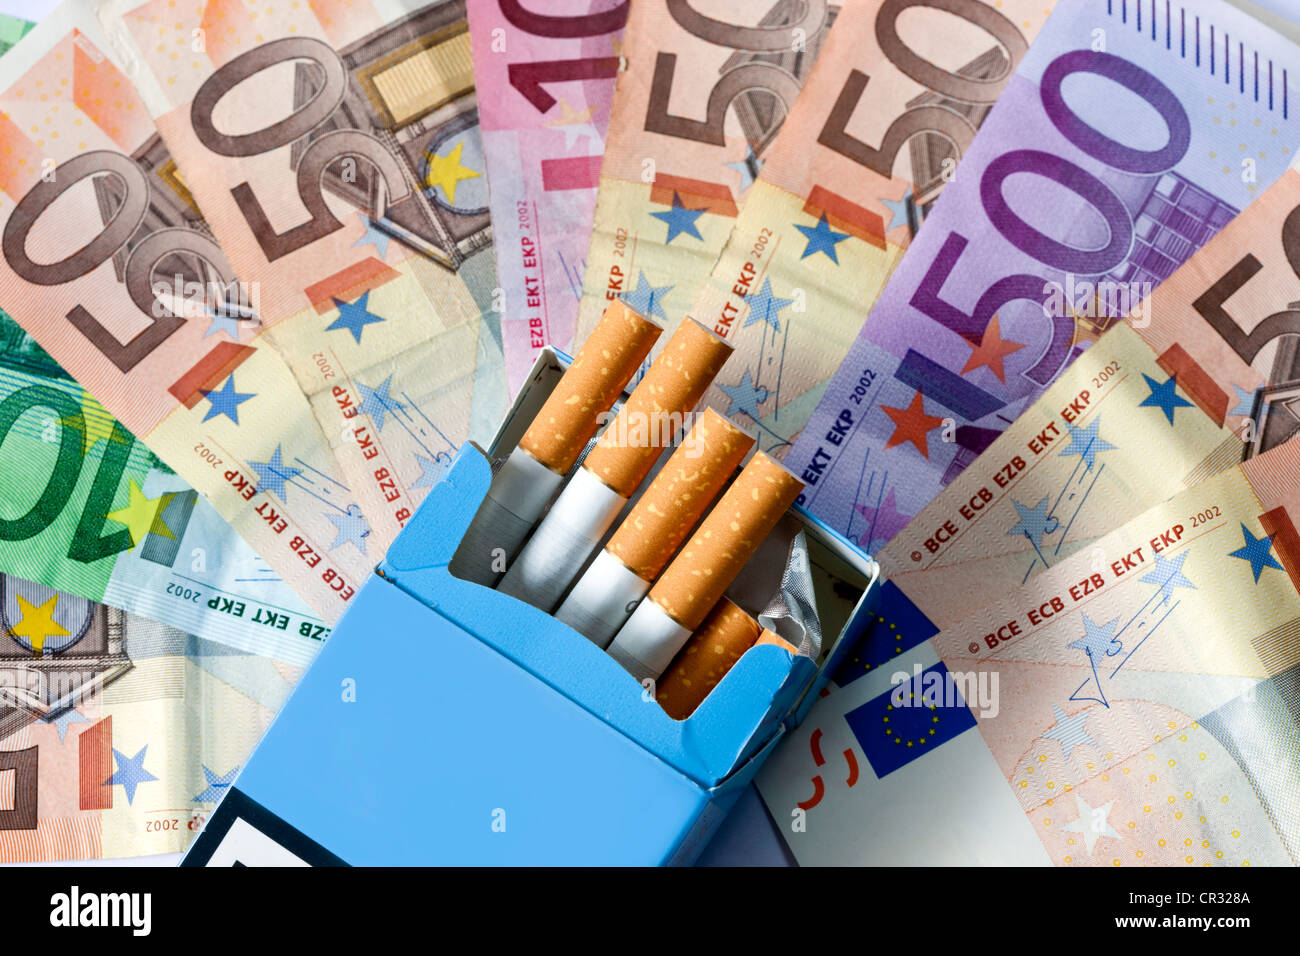 Smoking costs money, euro bank notes and cigarettes Stock Photo